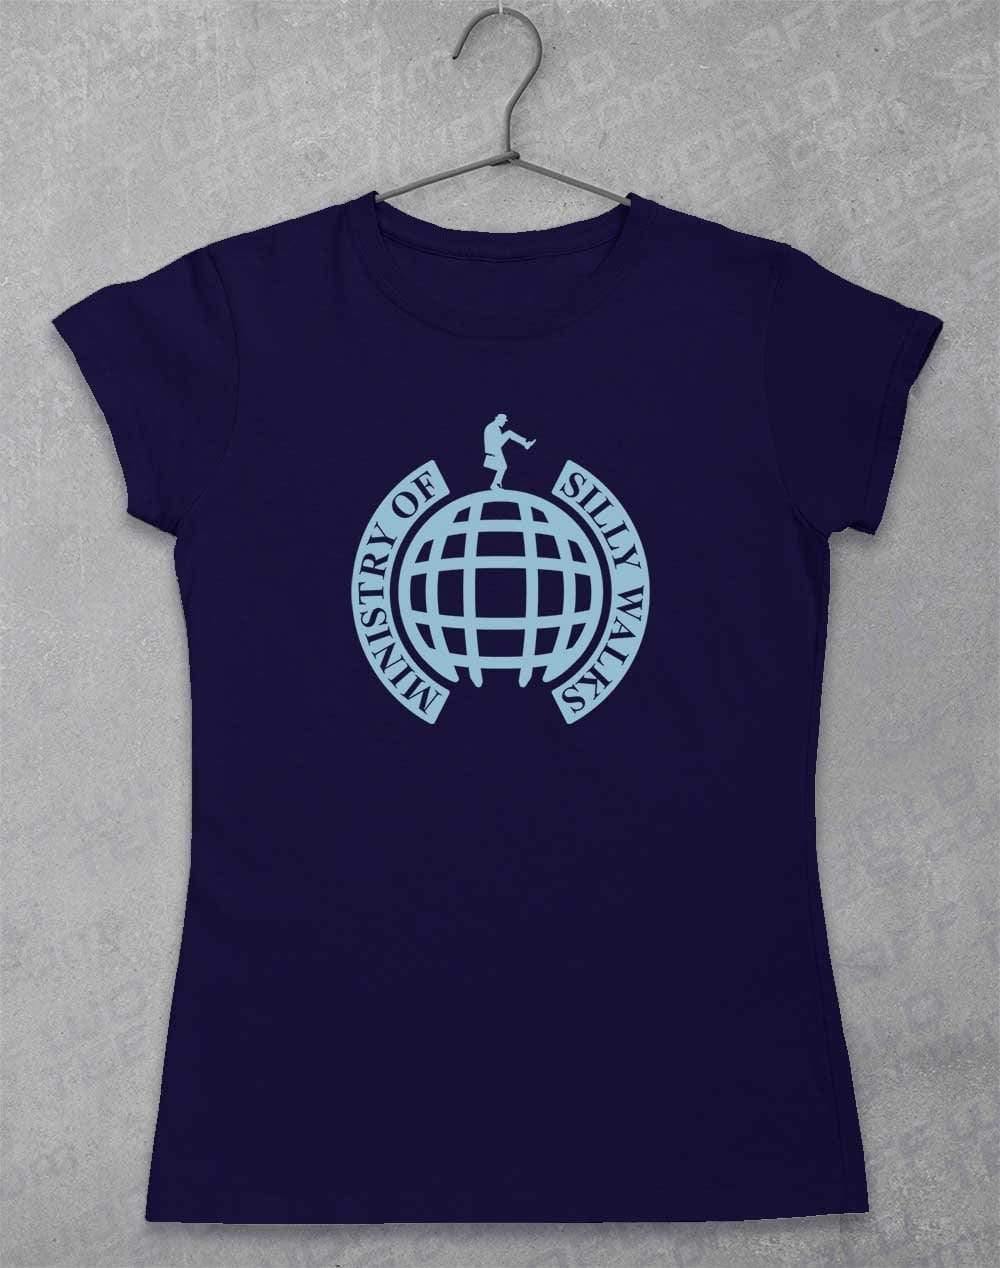 Ministry of Silly Walks Womens T-Shirt 8-10 / Navy  - Off World Tees